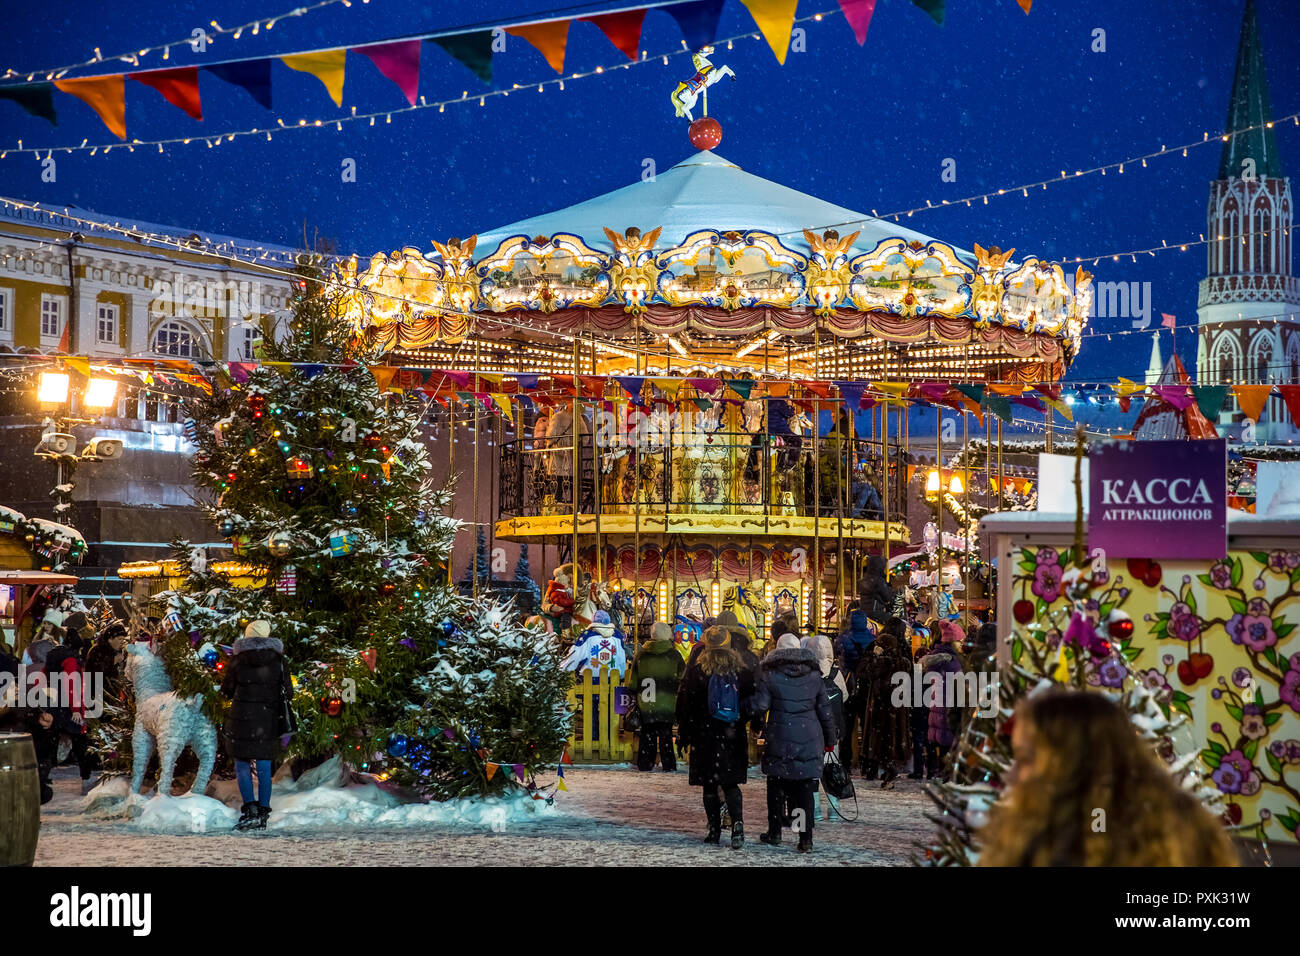 Christmas market fair with carousel in Moscow, Russia Stock Photo